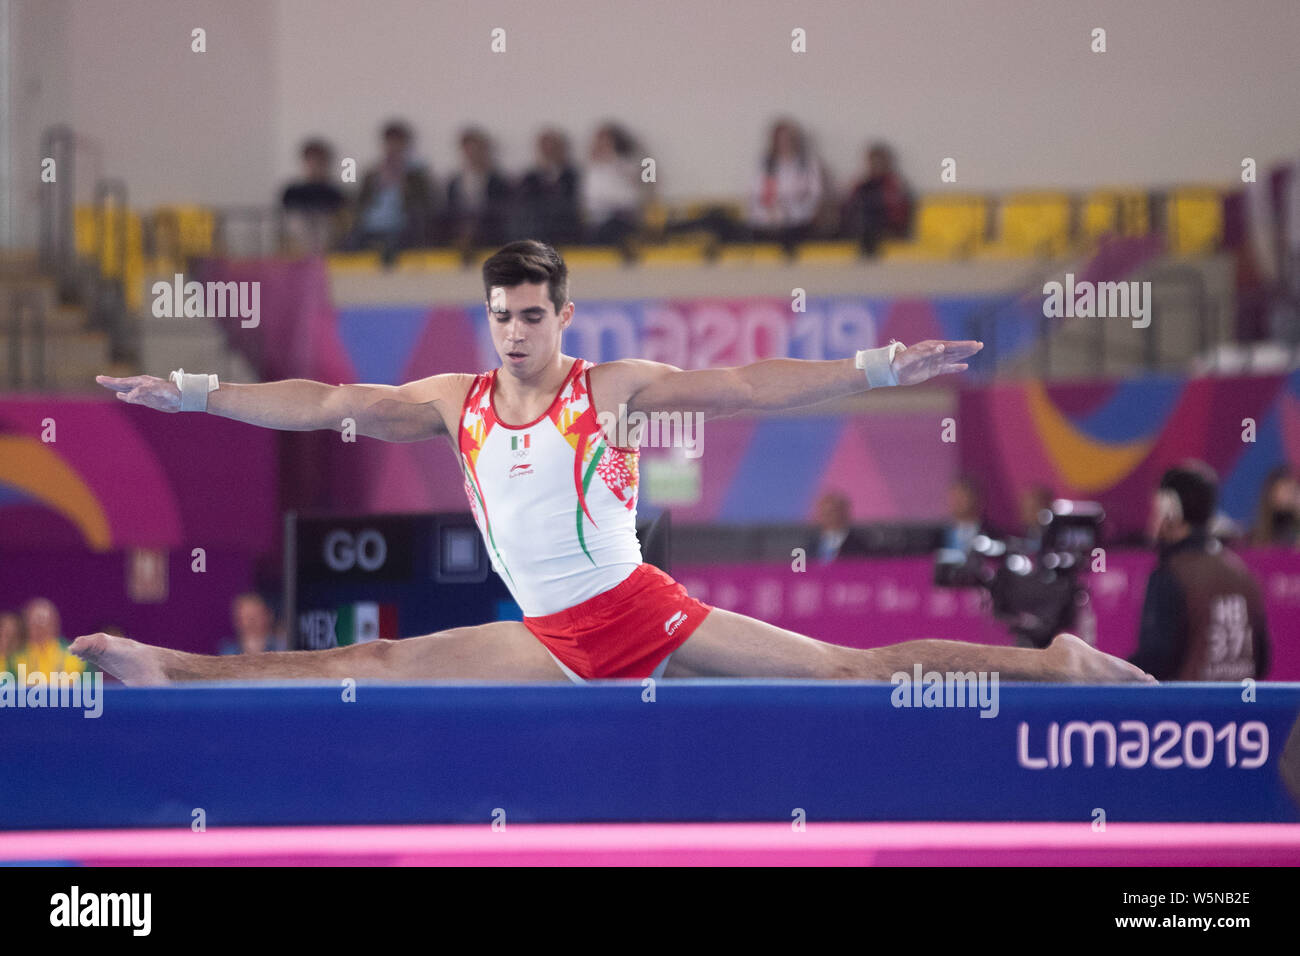 Lima, Peru. 28th July, 2019. Daniel Corral (#107) of Mexico performs his floor routine during the Pan American Games Artistic Gymnastics, Men's Team Qualification and Final at Polideportivo Villa el Salvador in Lima, Peru. Daniel Lea/CSM/Alamy Live News Stock Photo